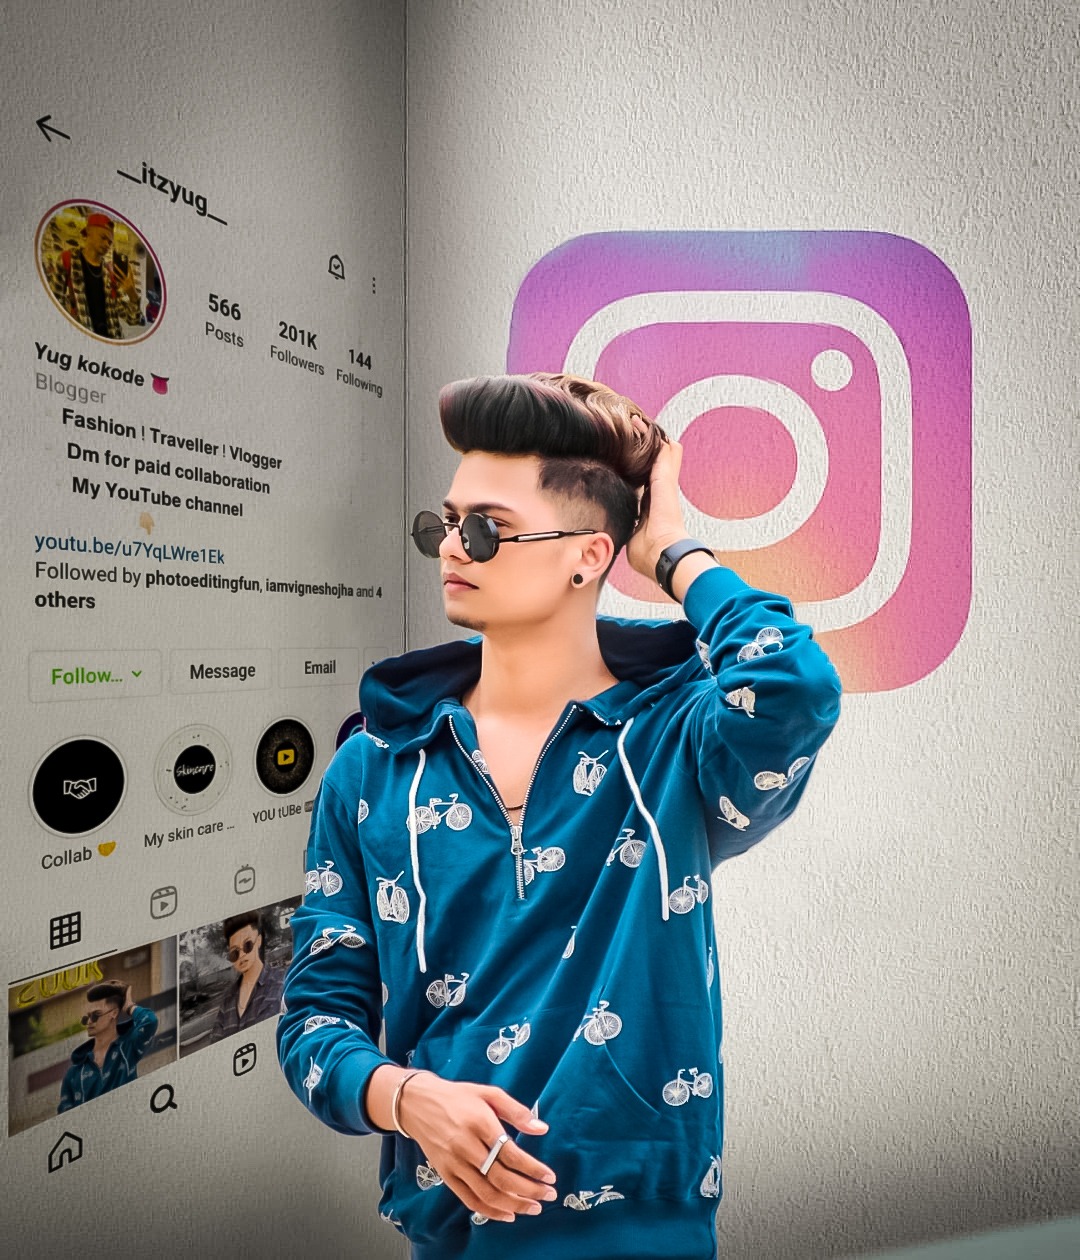 Instagram Profile Wall Photo Editing Download Full HD Background And